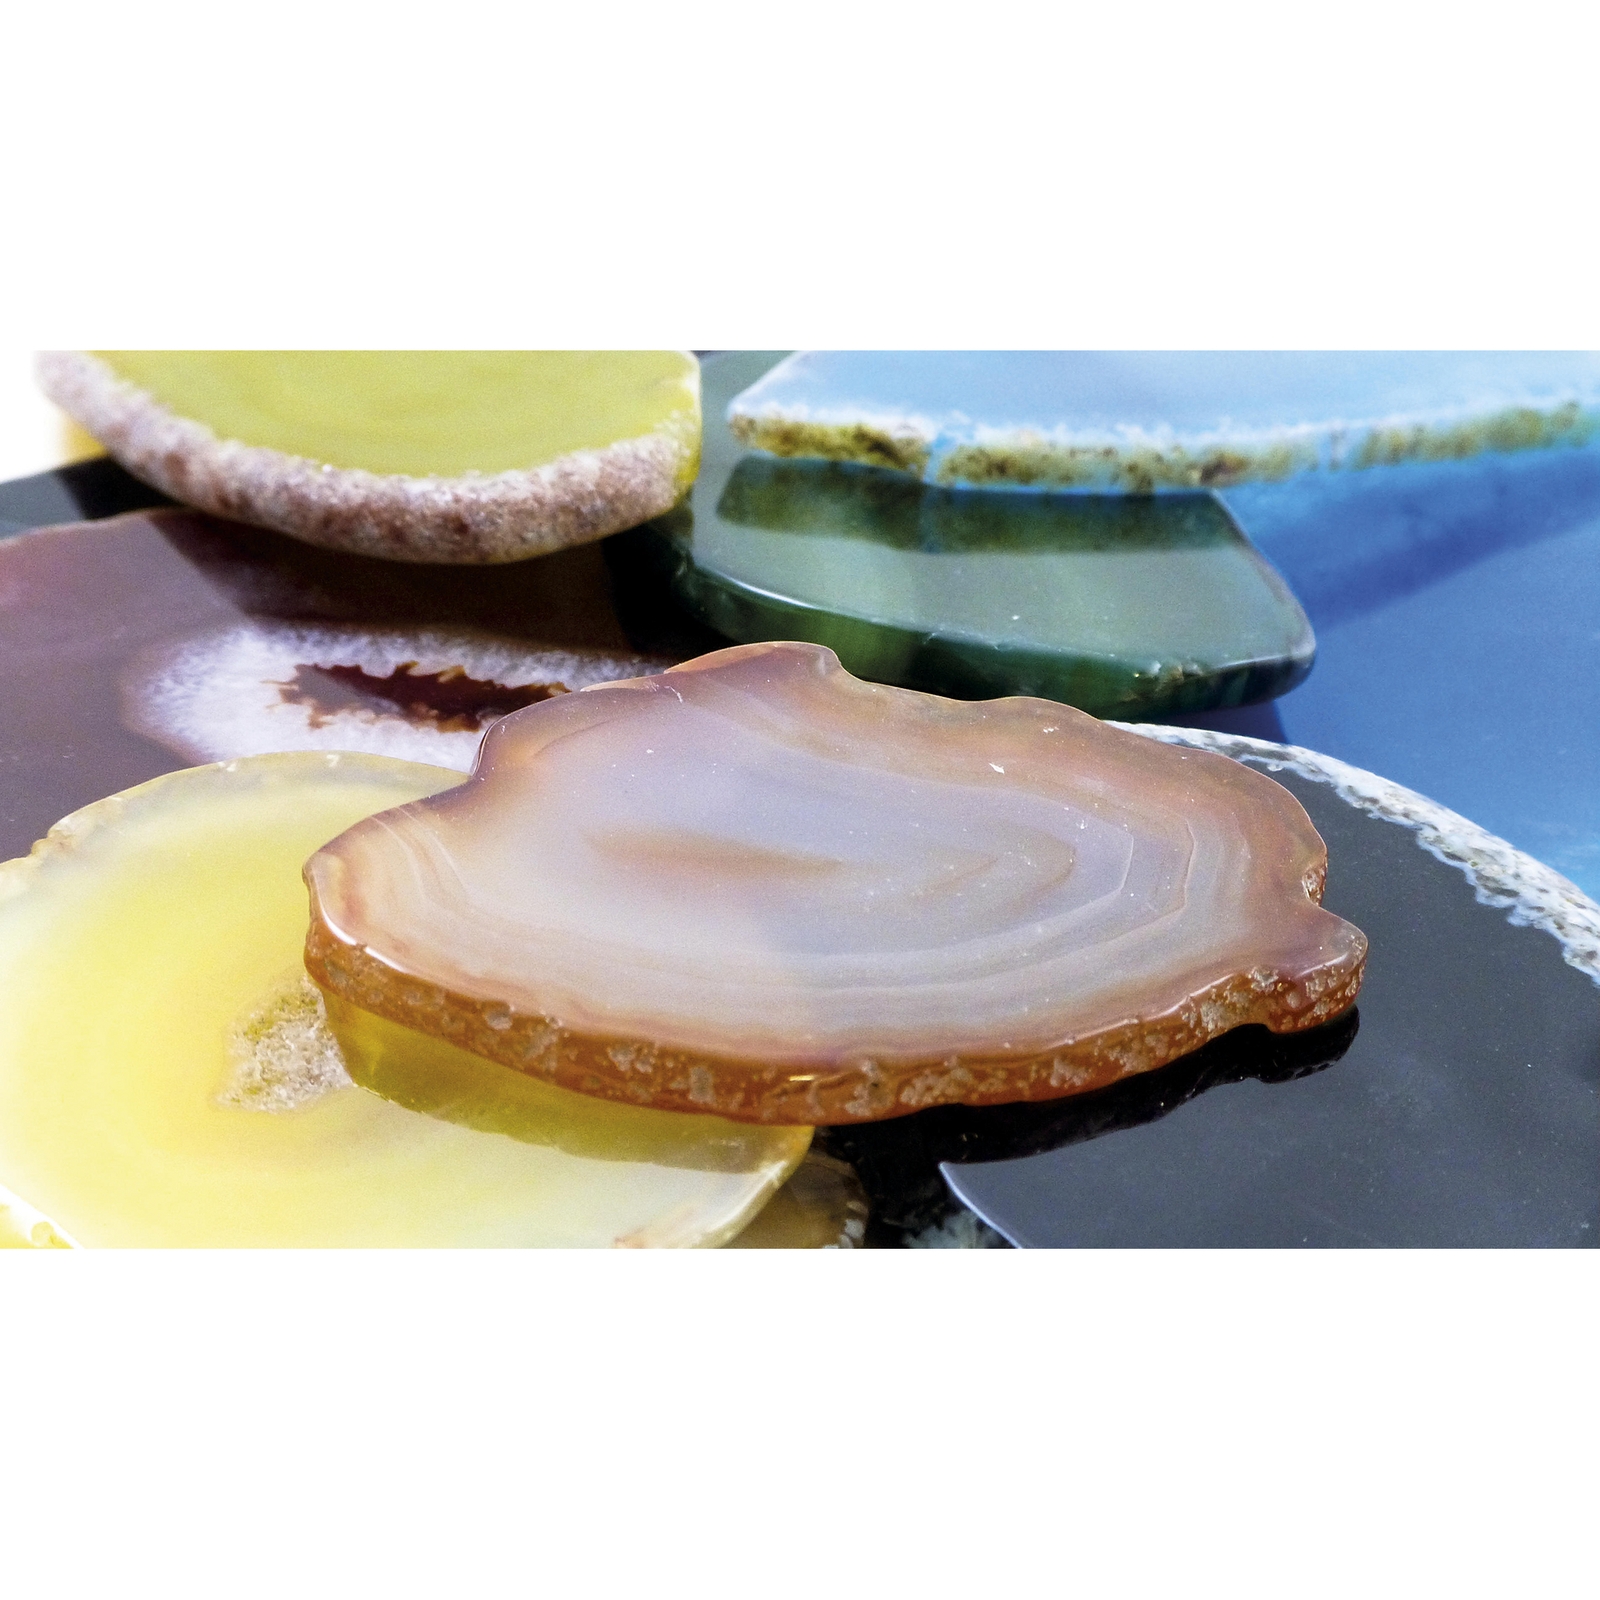 Agate Slices - Pack of 6